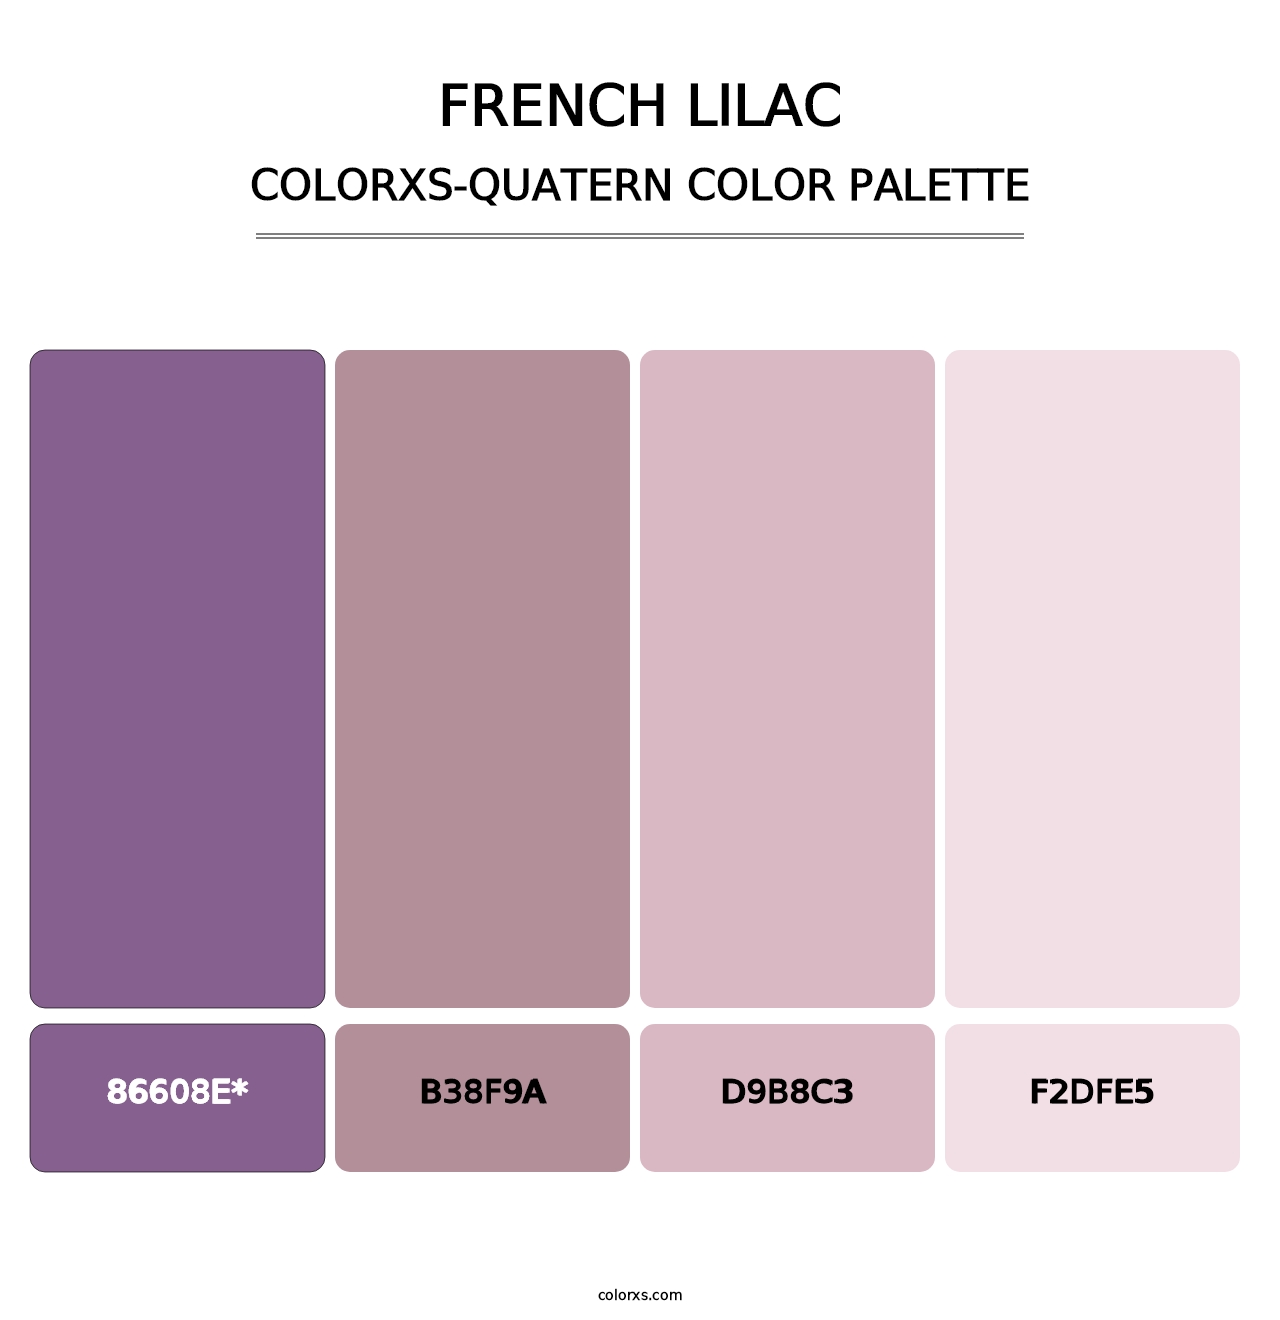 French Lilac - Colorxs Quatern Palette